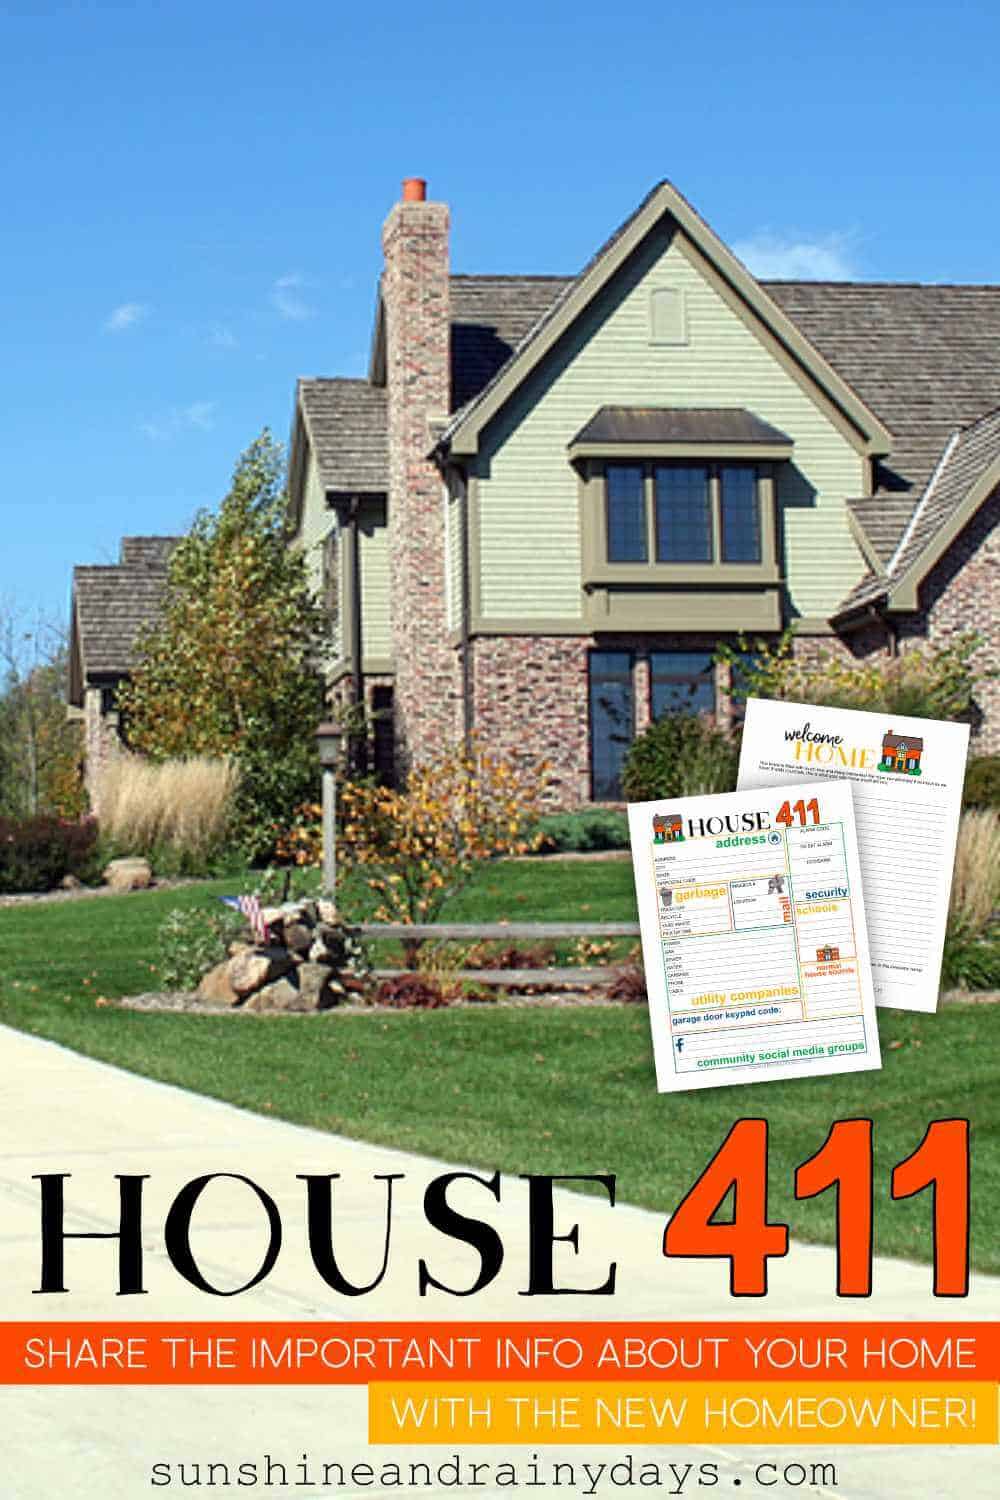 House 411 Information Sheet for the new homeowner.